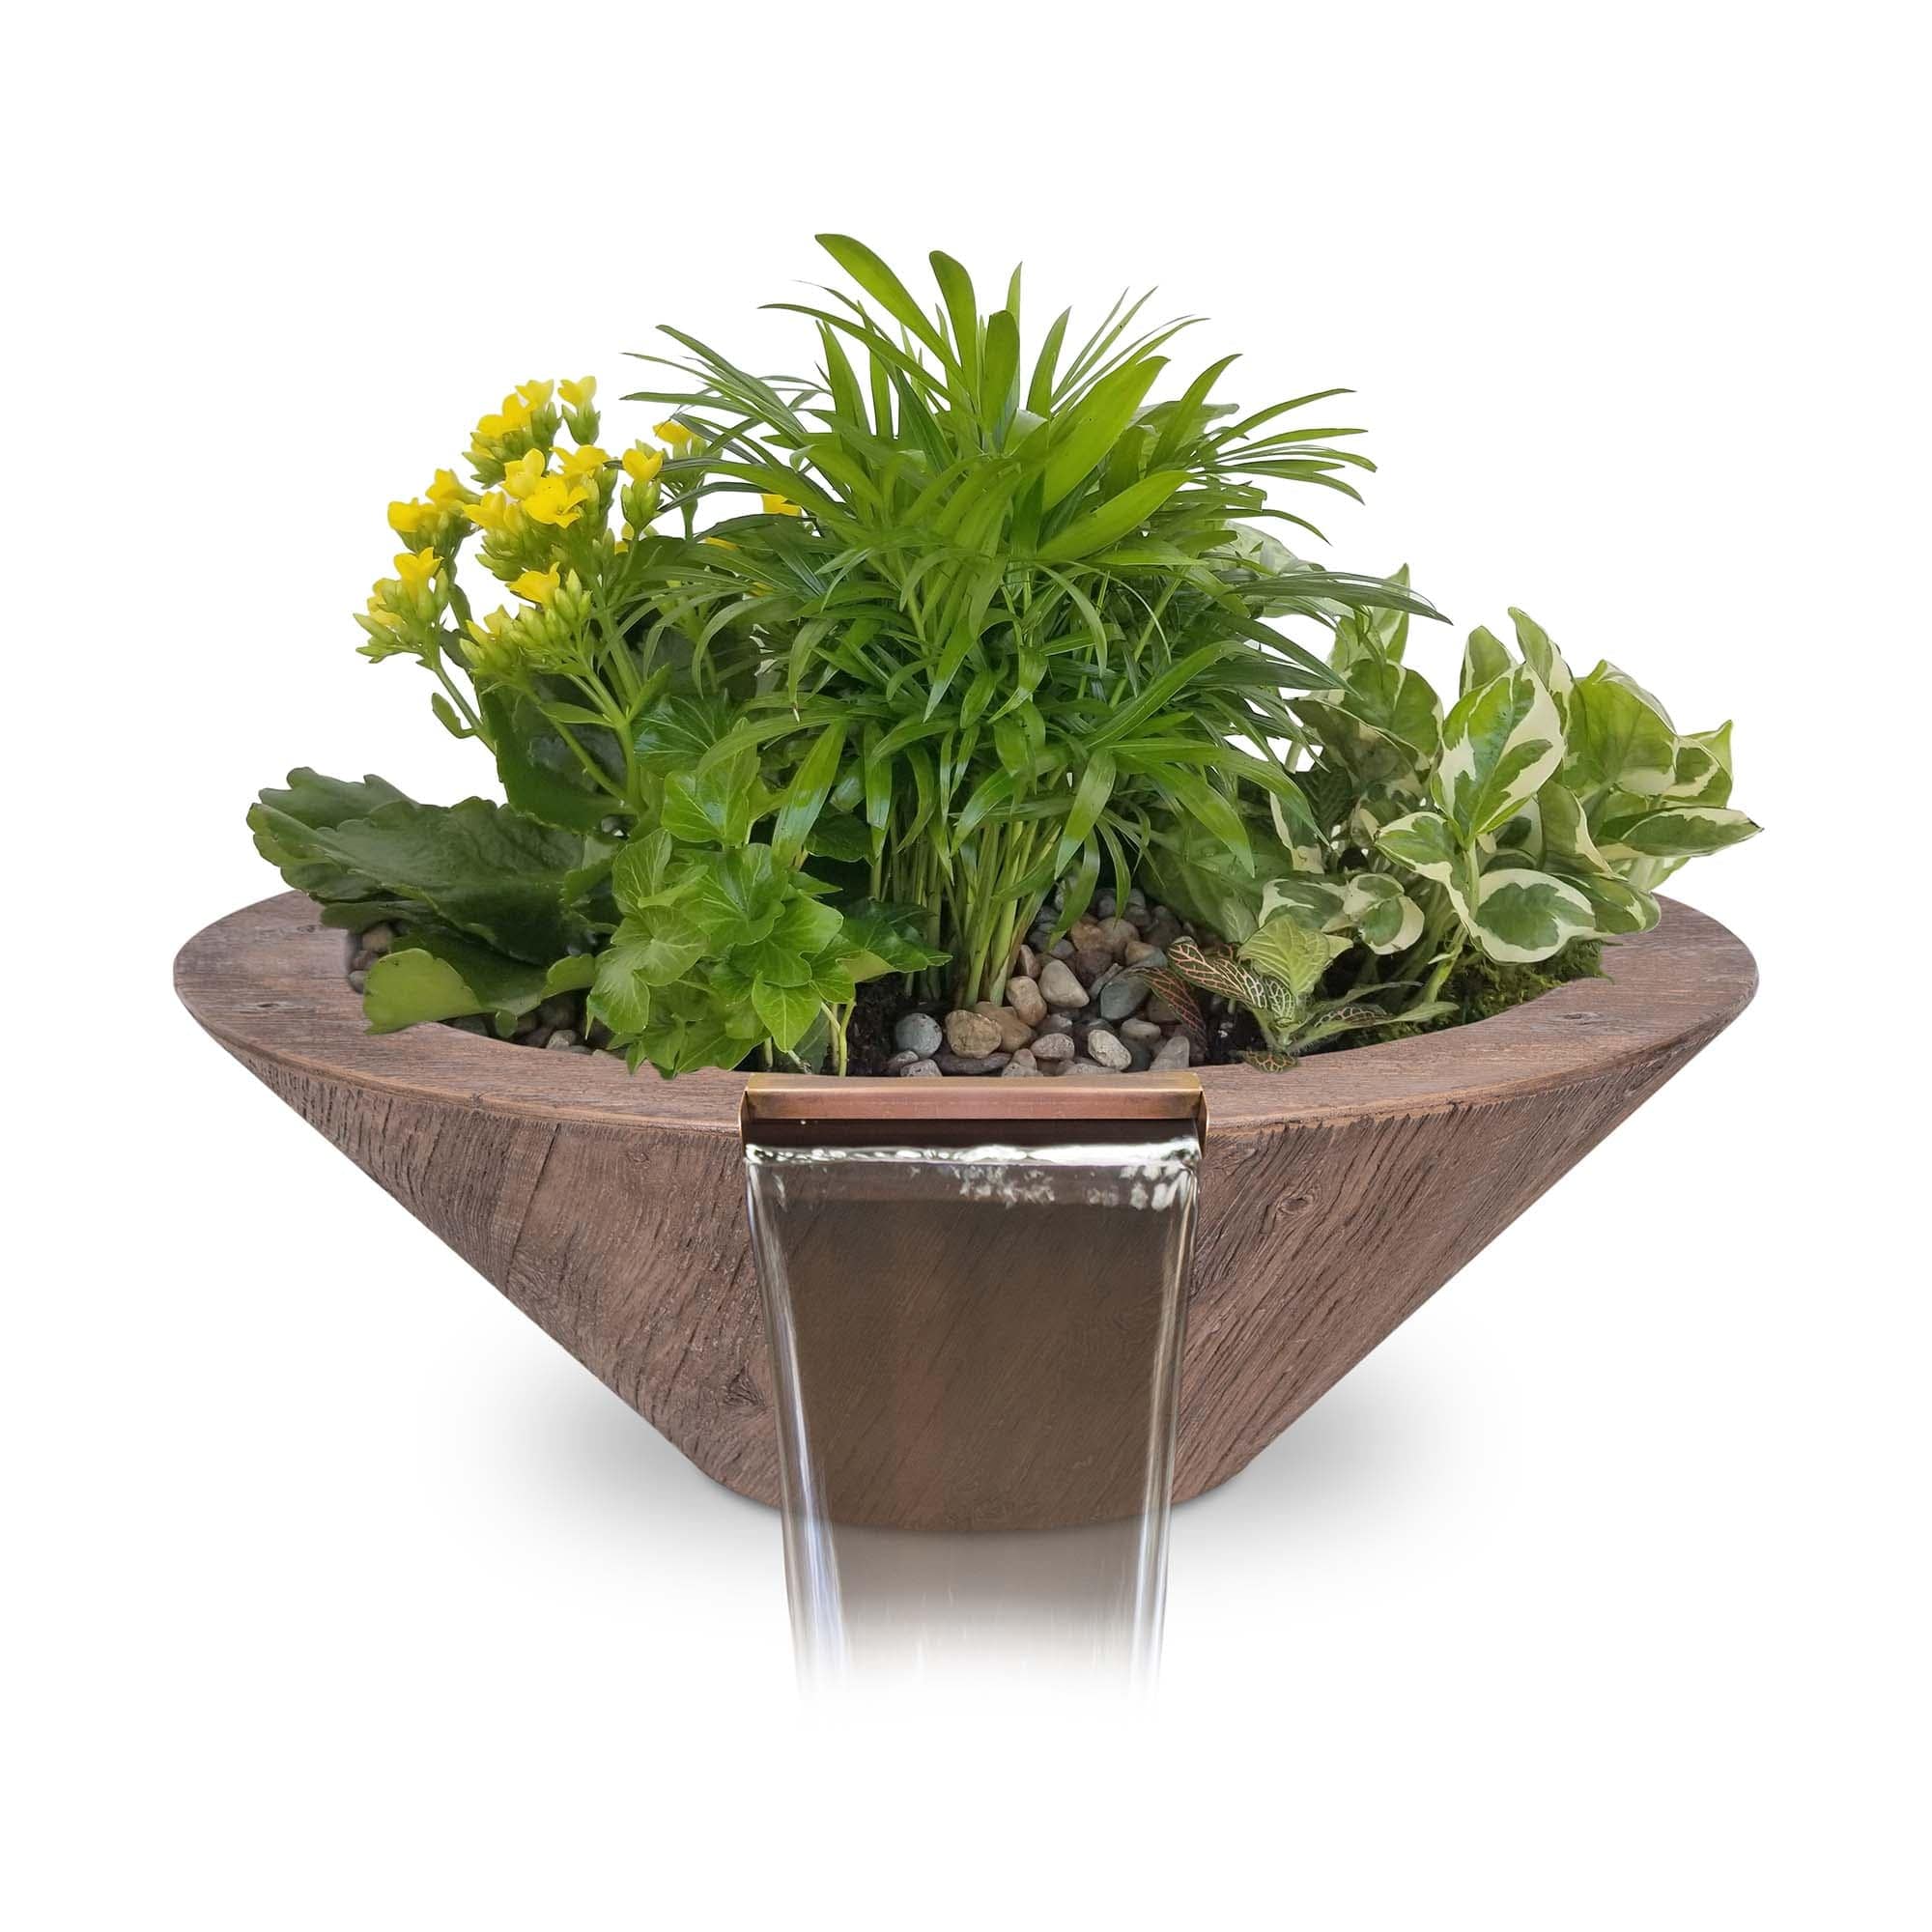 The Outdoor Plus Planter & Water Bowl 24